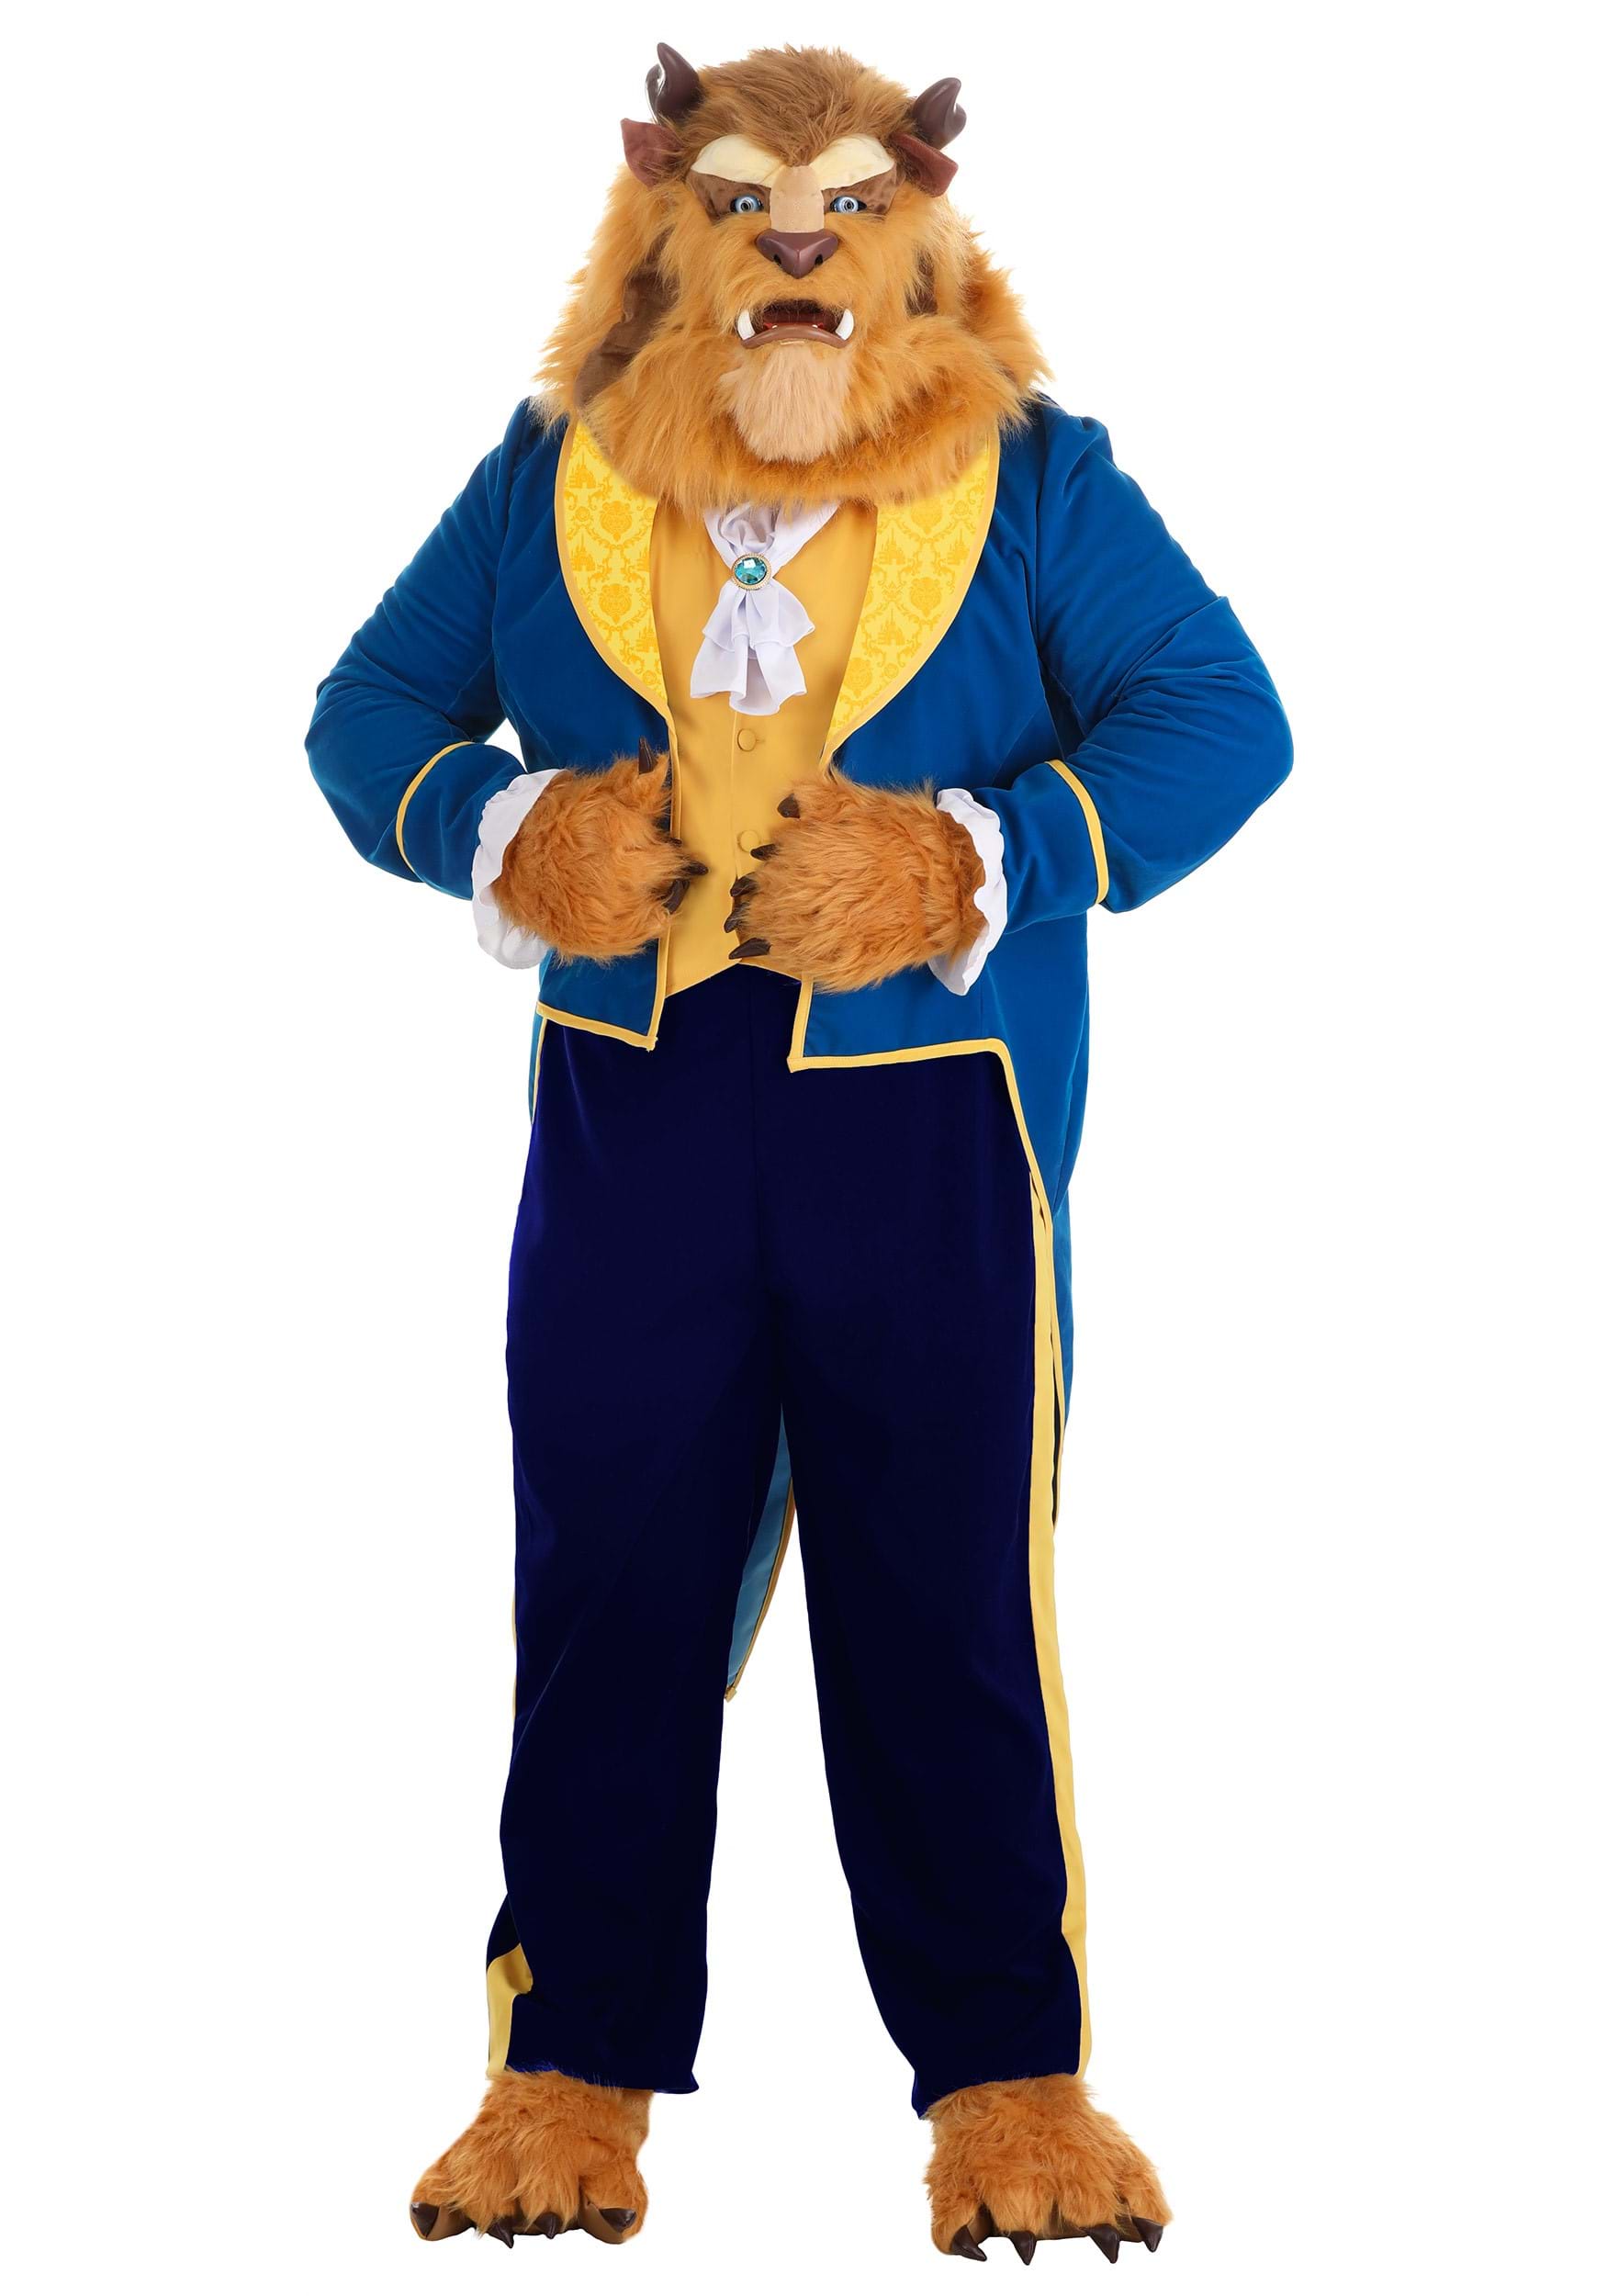 Photos - Fancy Dress A&D FUN Costumes Beauty and the Beast Authentic Beast Plus Size Men's Costume 